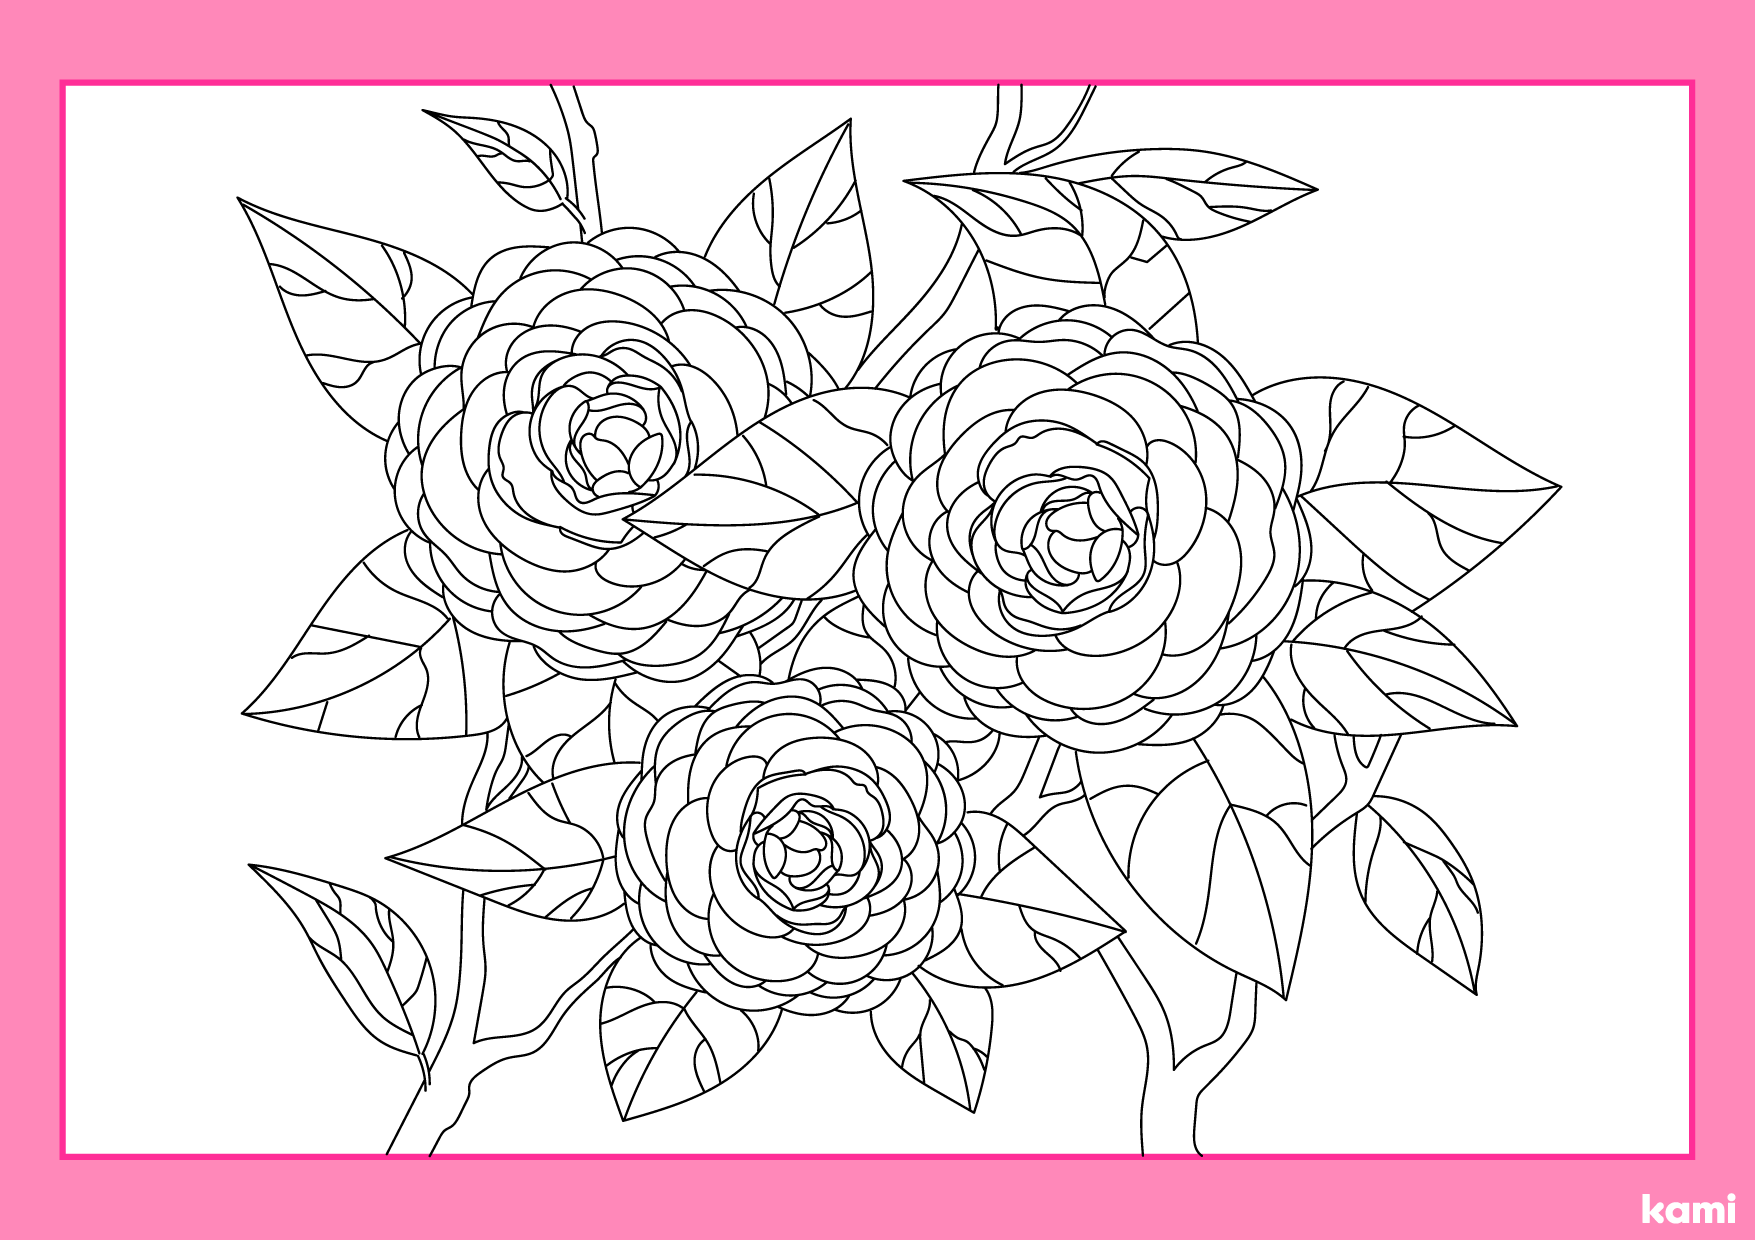 spring flower coloring page